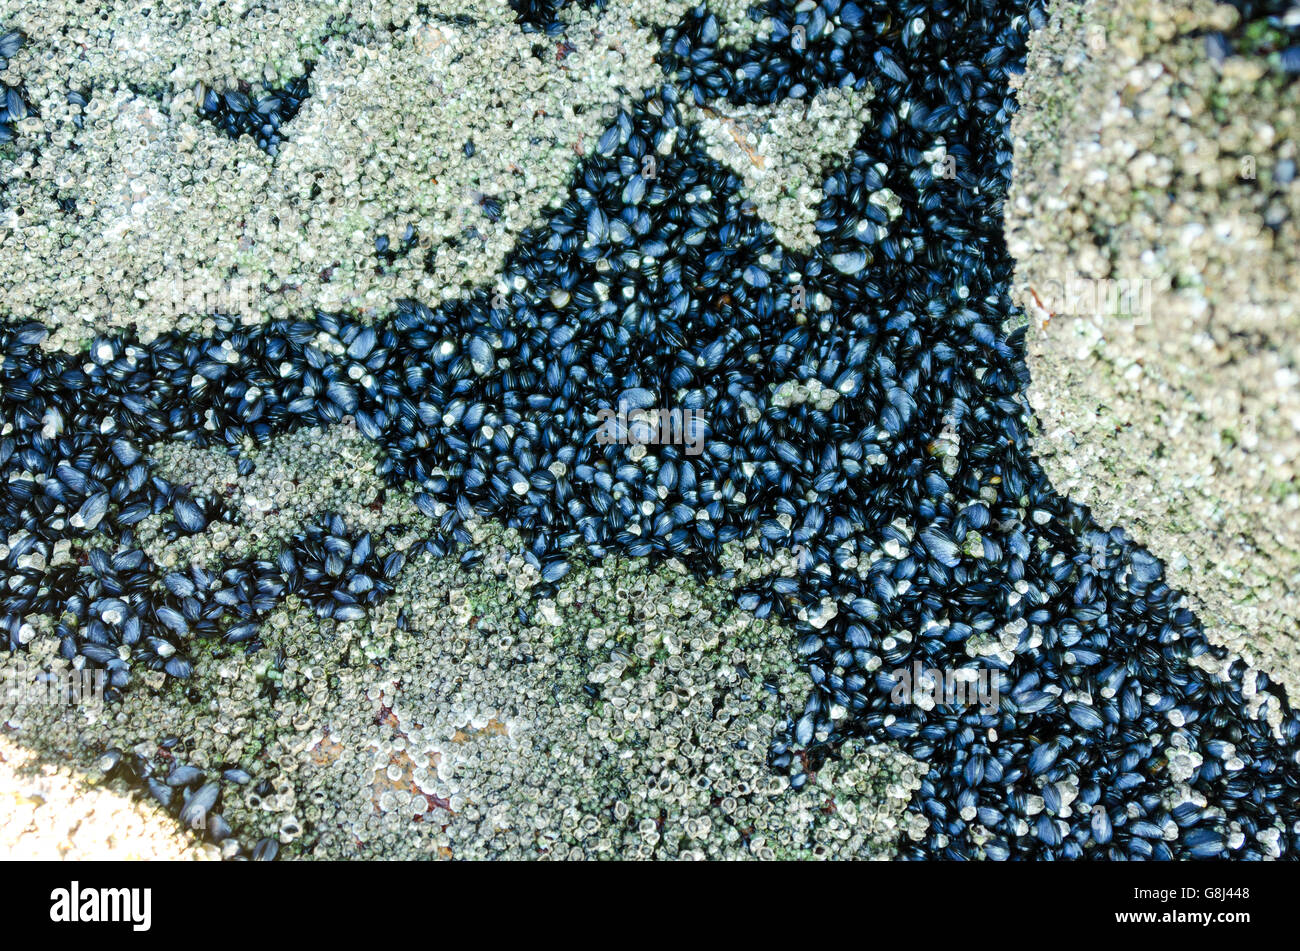 Baby Blue Mussels crowd a cleft in the stone between barnacle colonies. Stock Photo